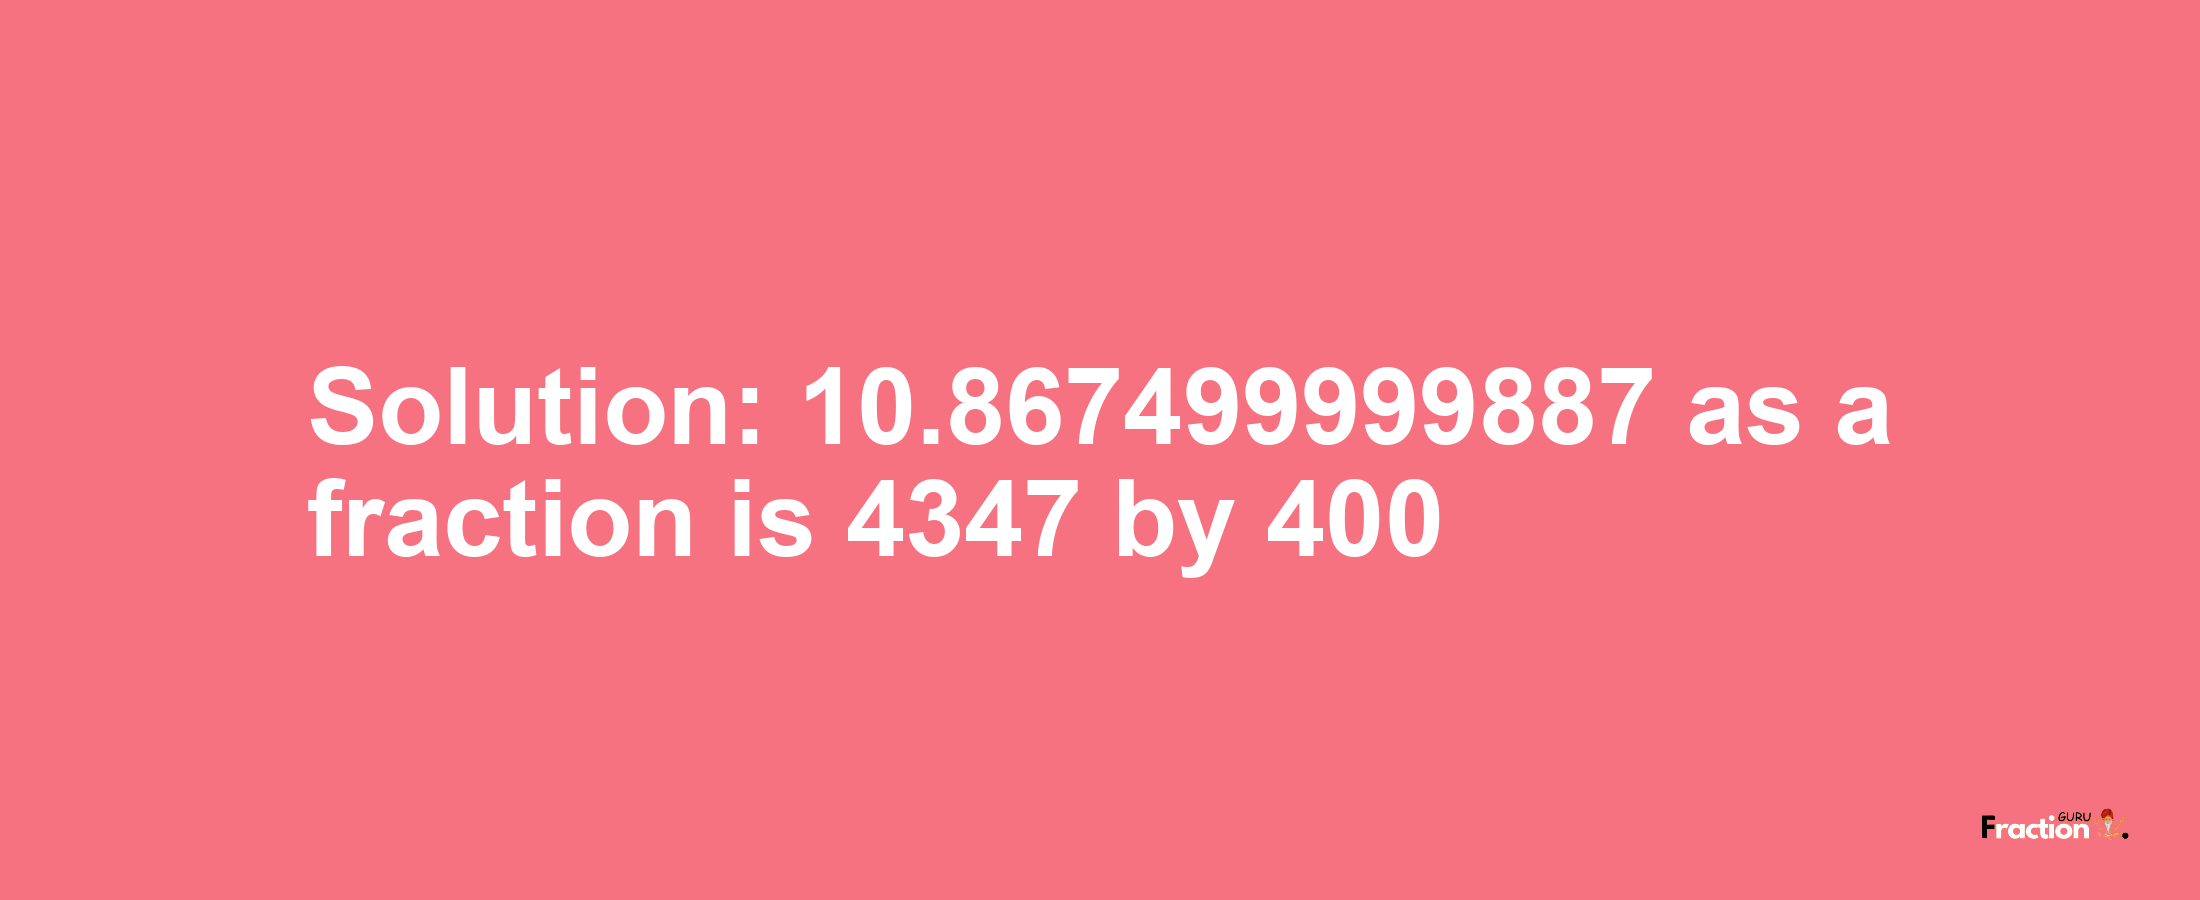 Solution:10.867499999887 as a fraction is 4347/400